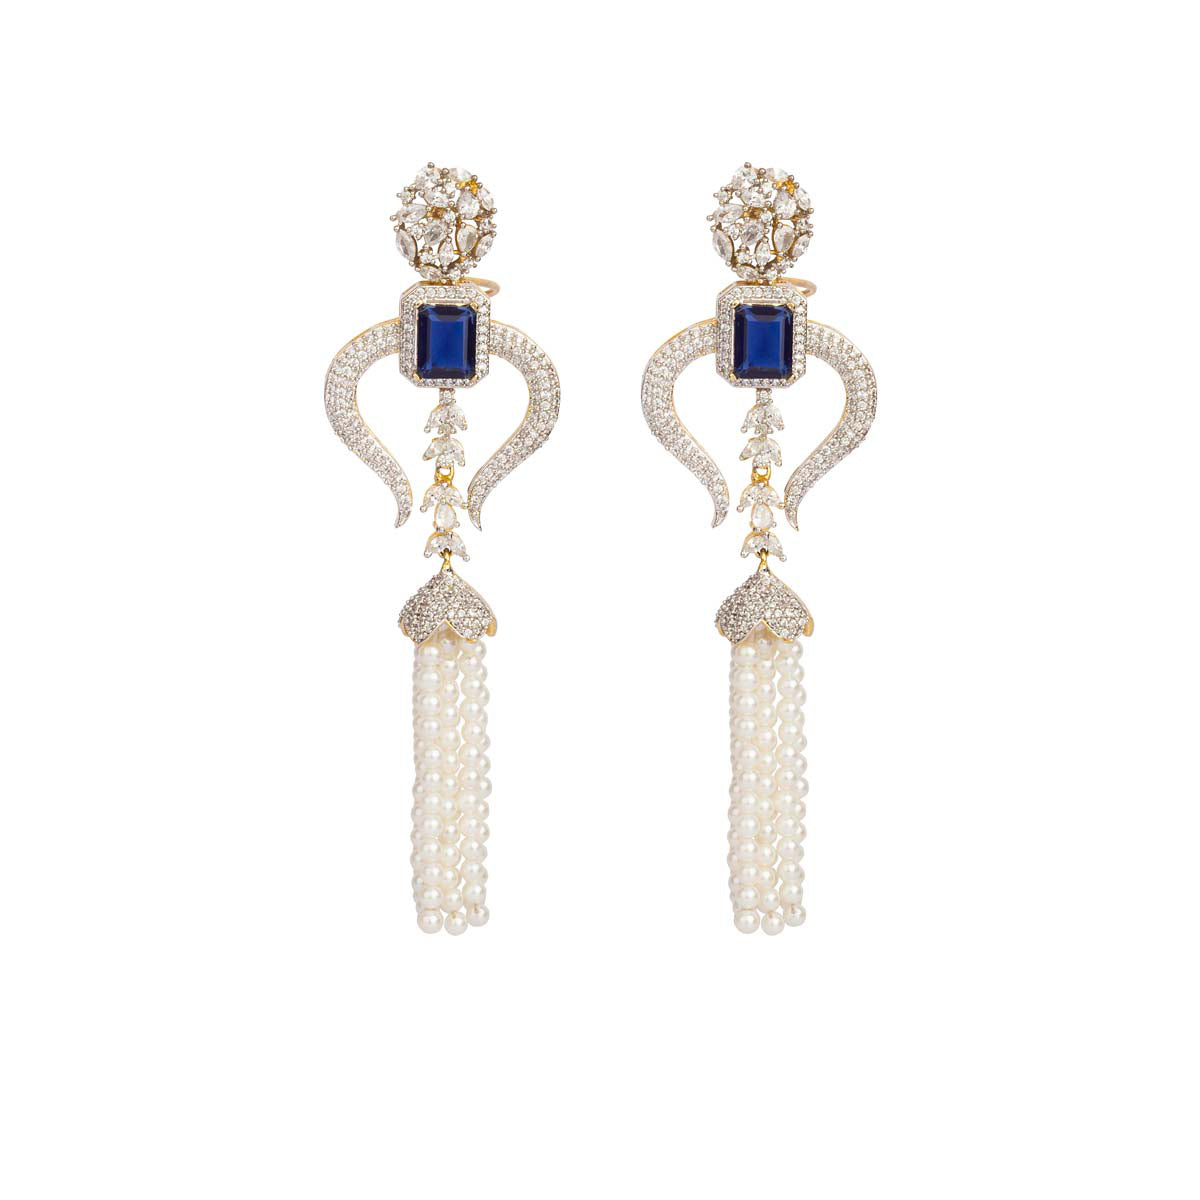 Soft as a subtle wind and sensational as the starry sky, these flawless earrings have white stones set in silver mixed metal with an emerald cut blue stone and dainty pearl danglers.